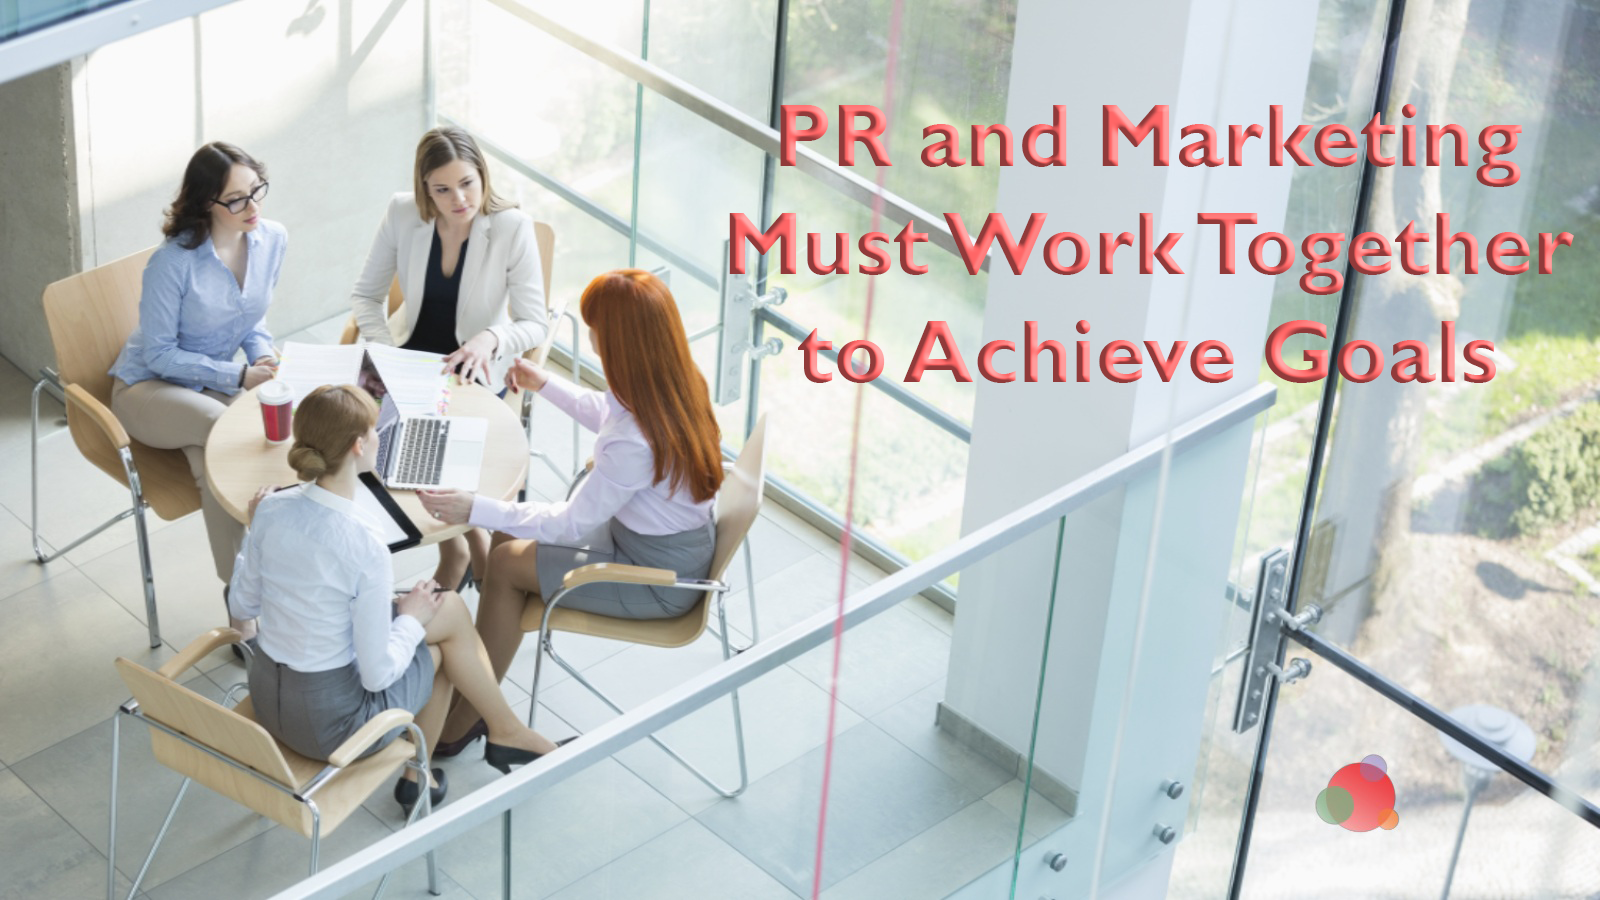 Why PR and Marketing Must Work Together for Better Results